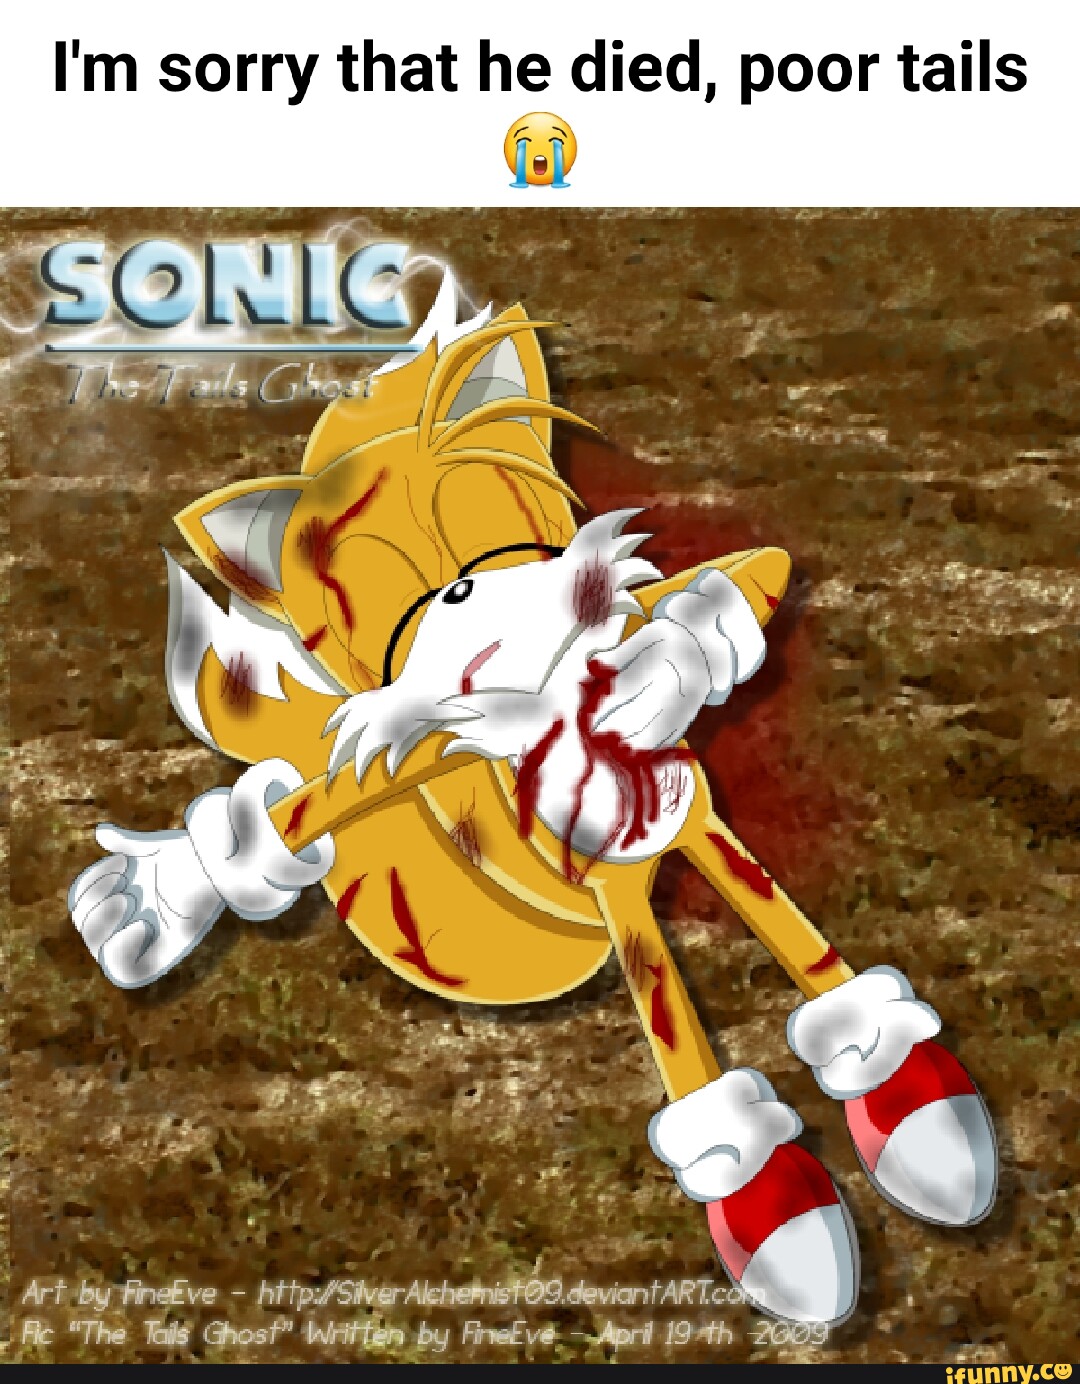 Sonic exe kills tails